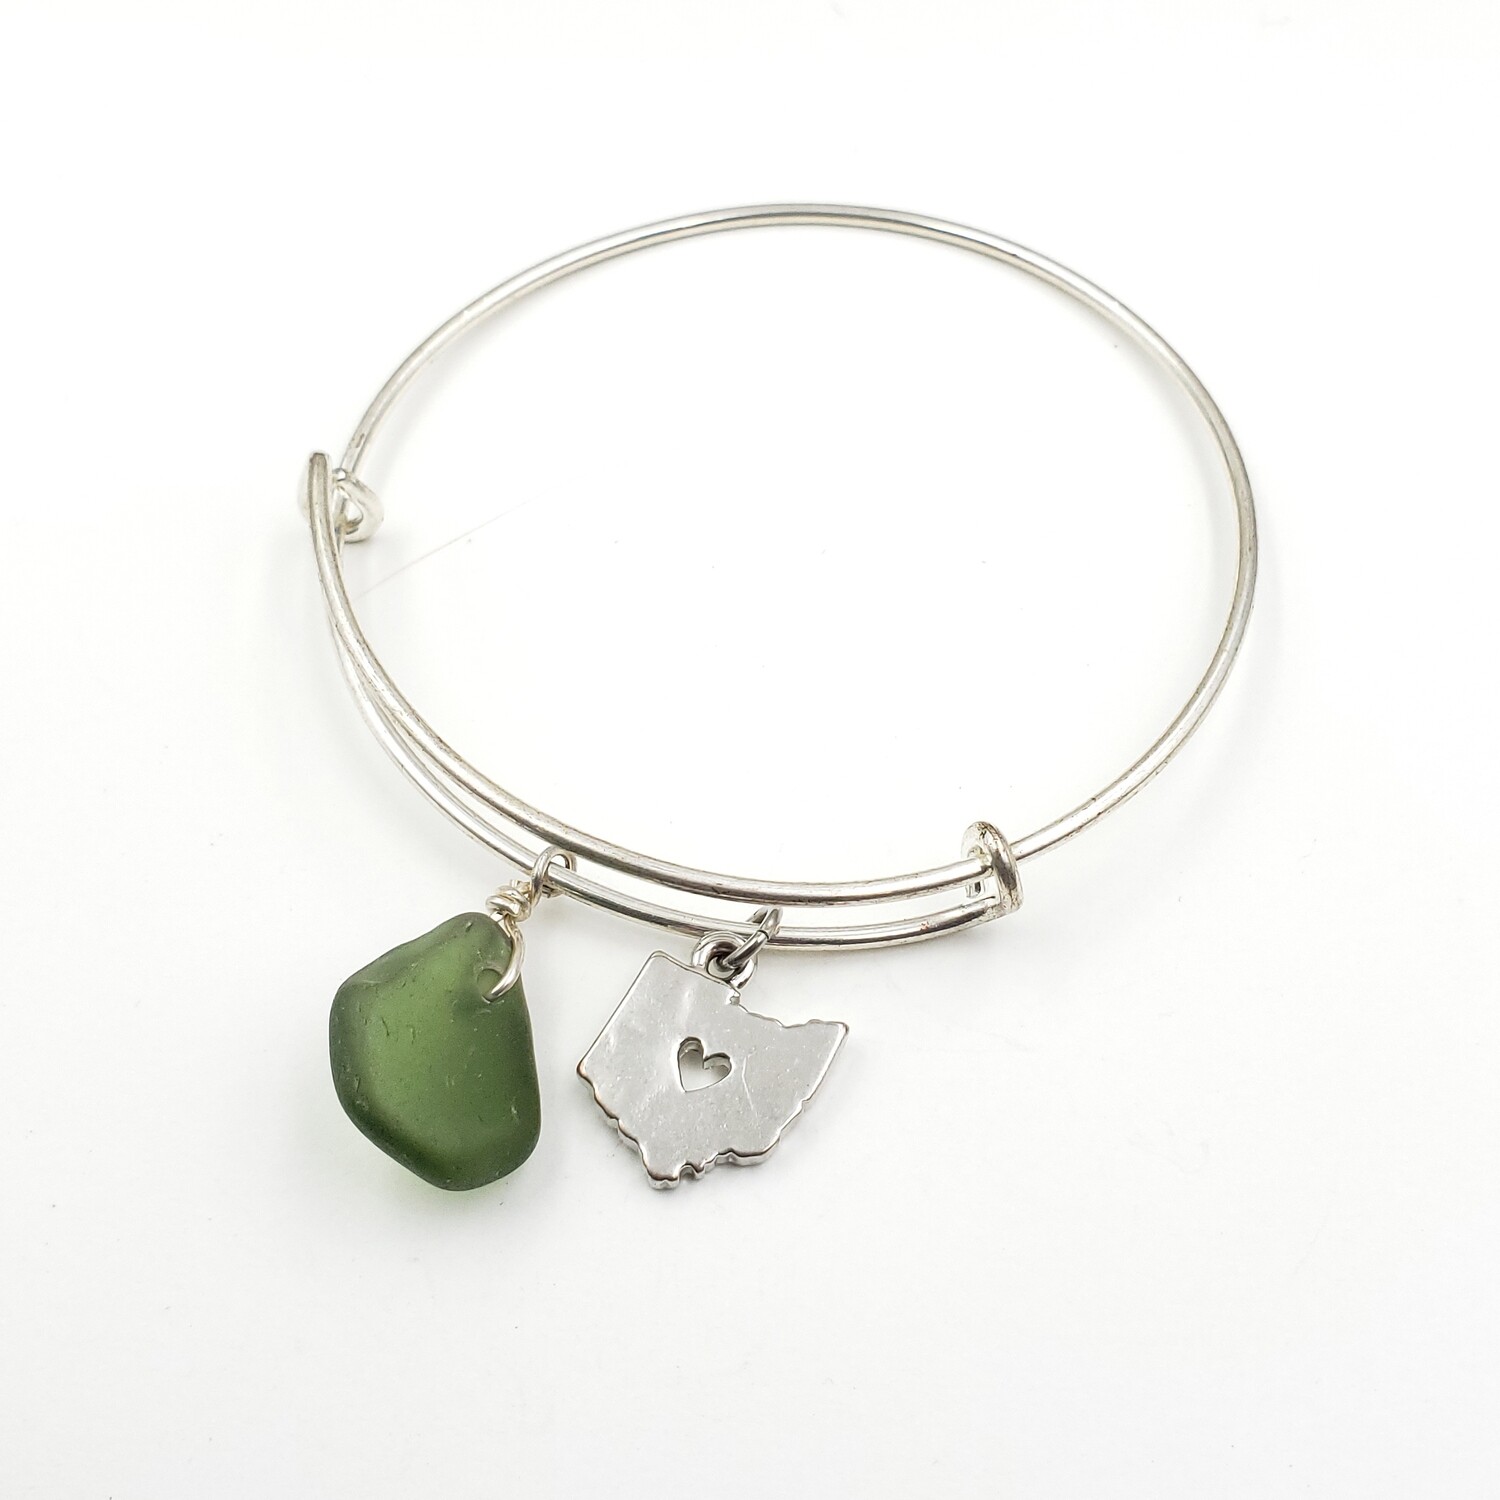 Bangle Bracelet with State of Ohio Charm and Olive Green Lake Erie Beach Glass